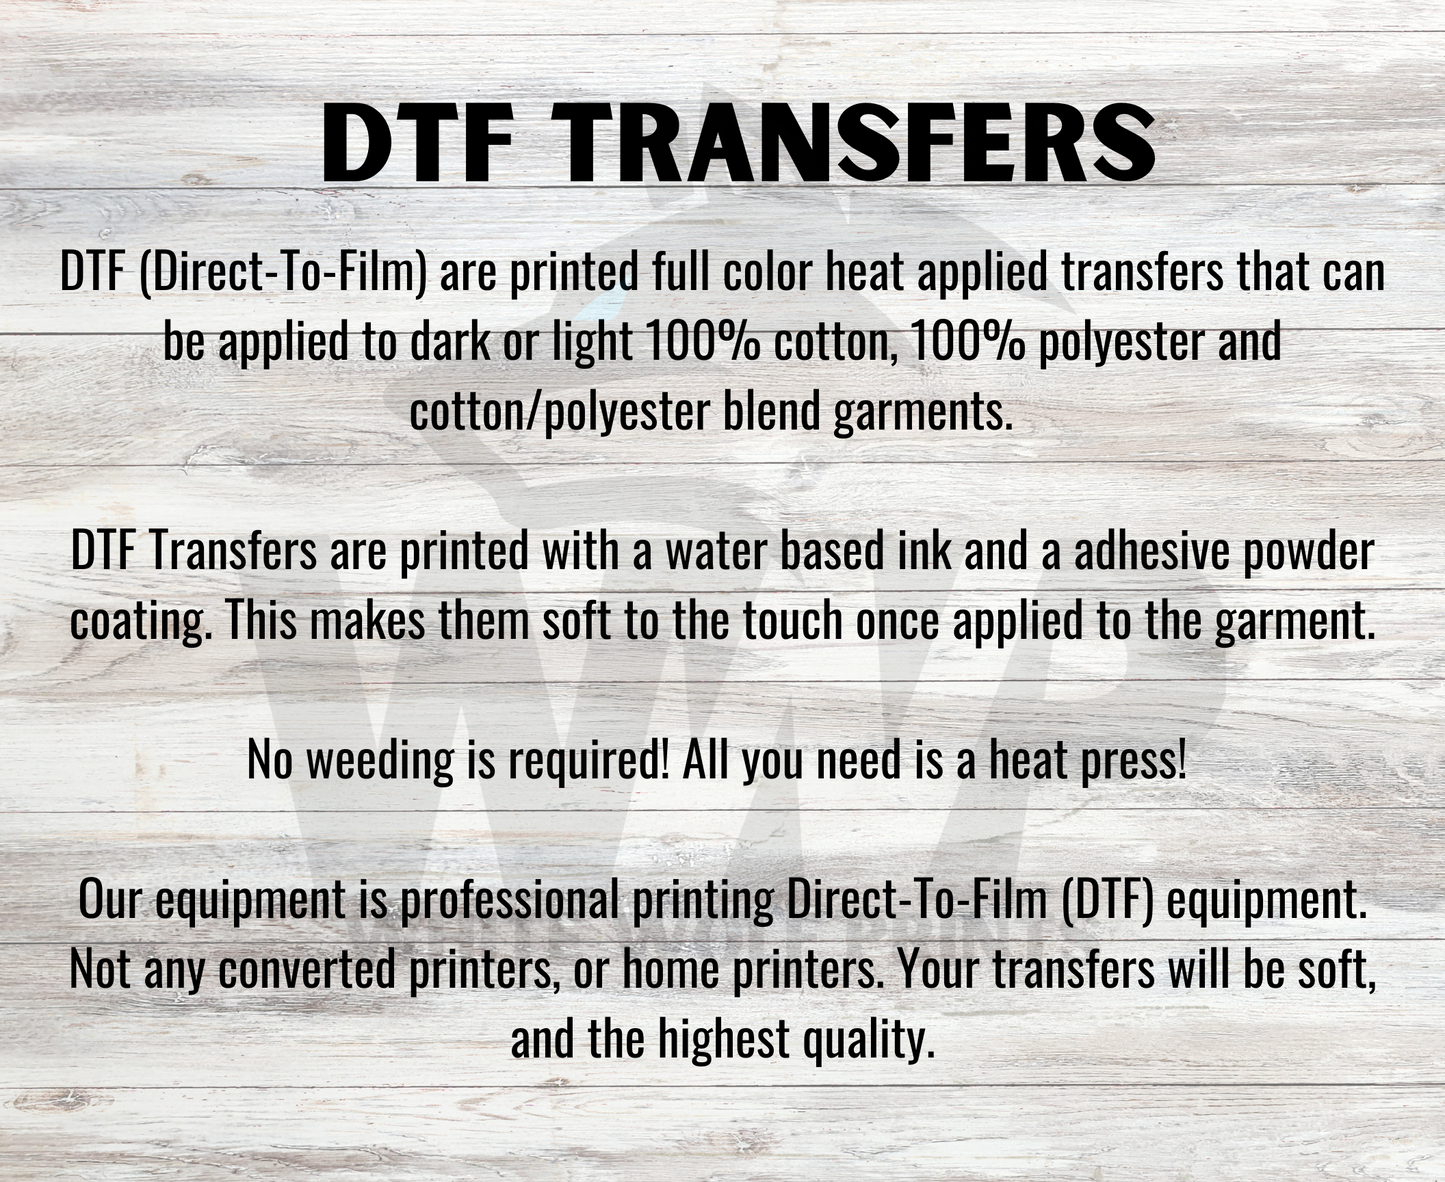 Direct-To-Film (DTF) HALLOWEEN TRANSFER